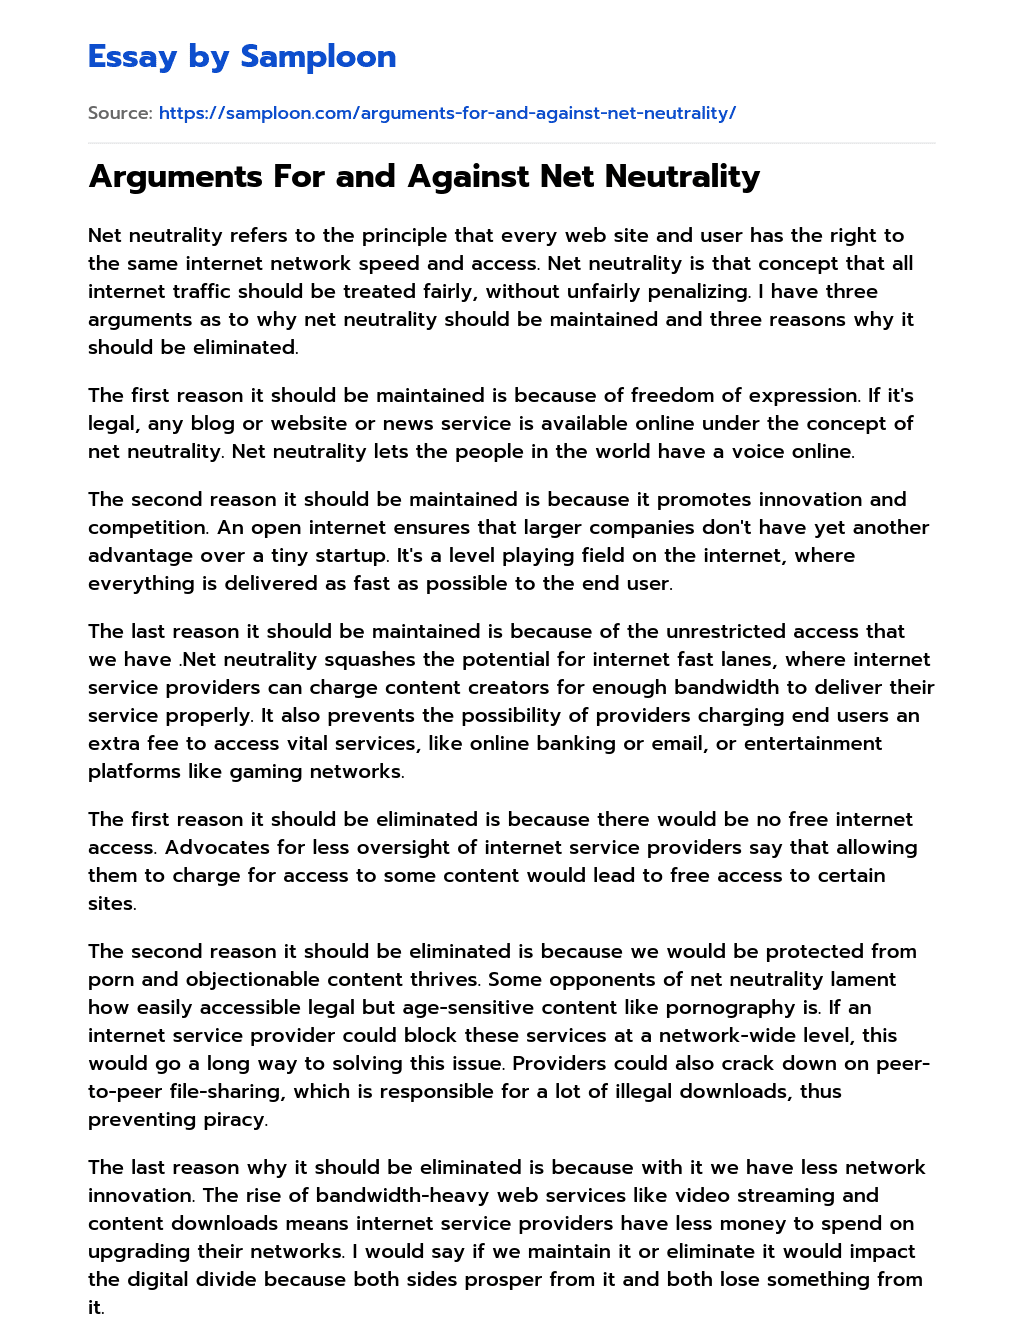 Arguments For and Against Net Neutrality essay